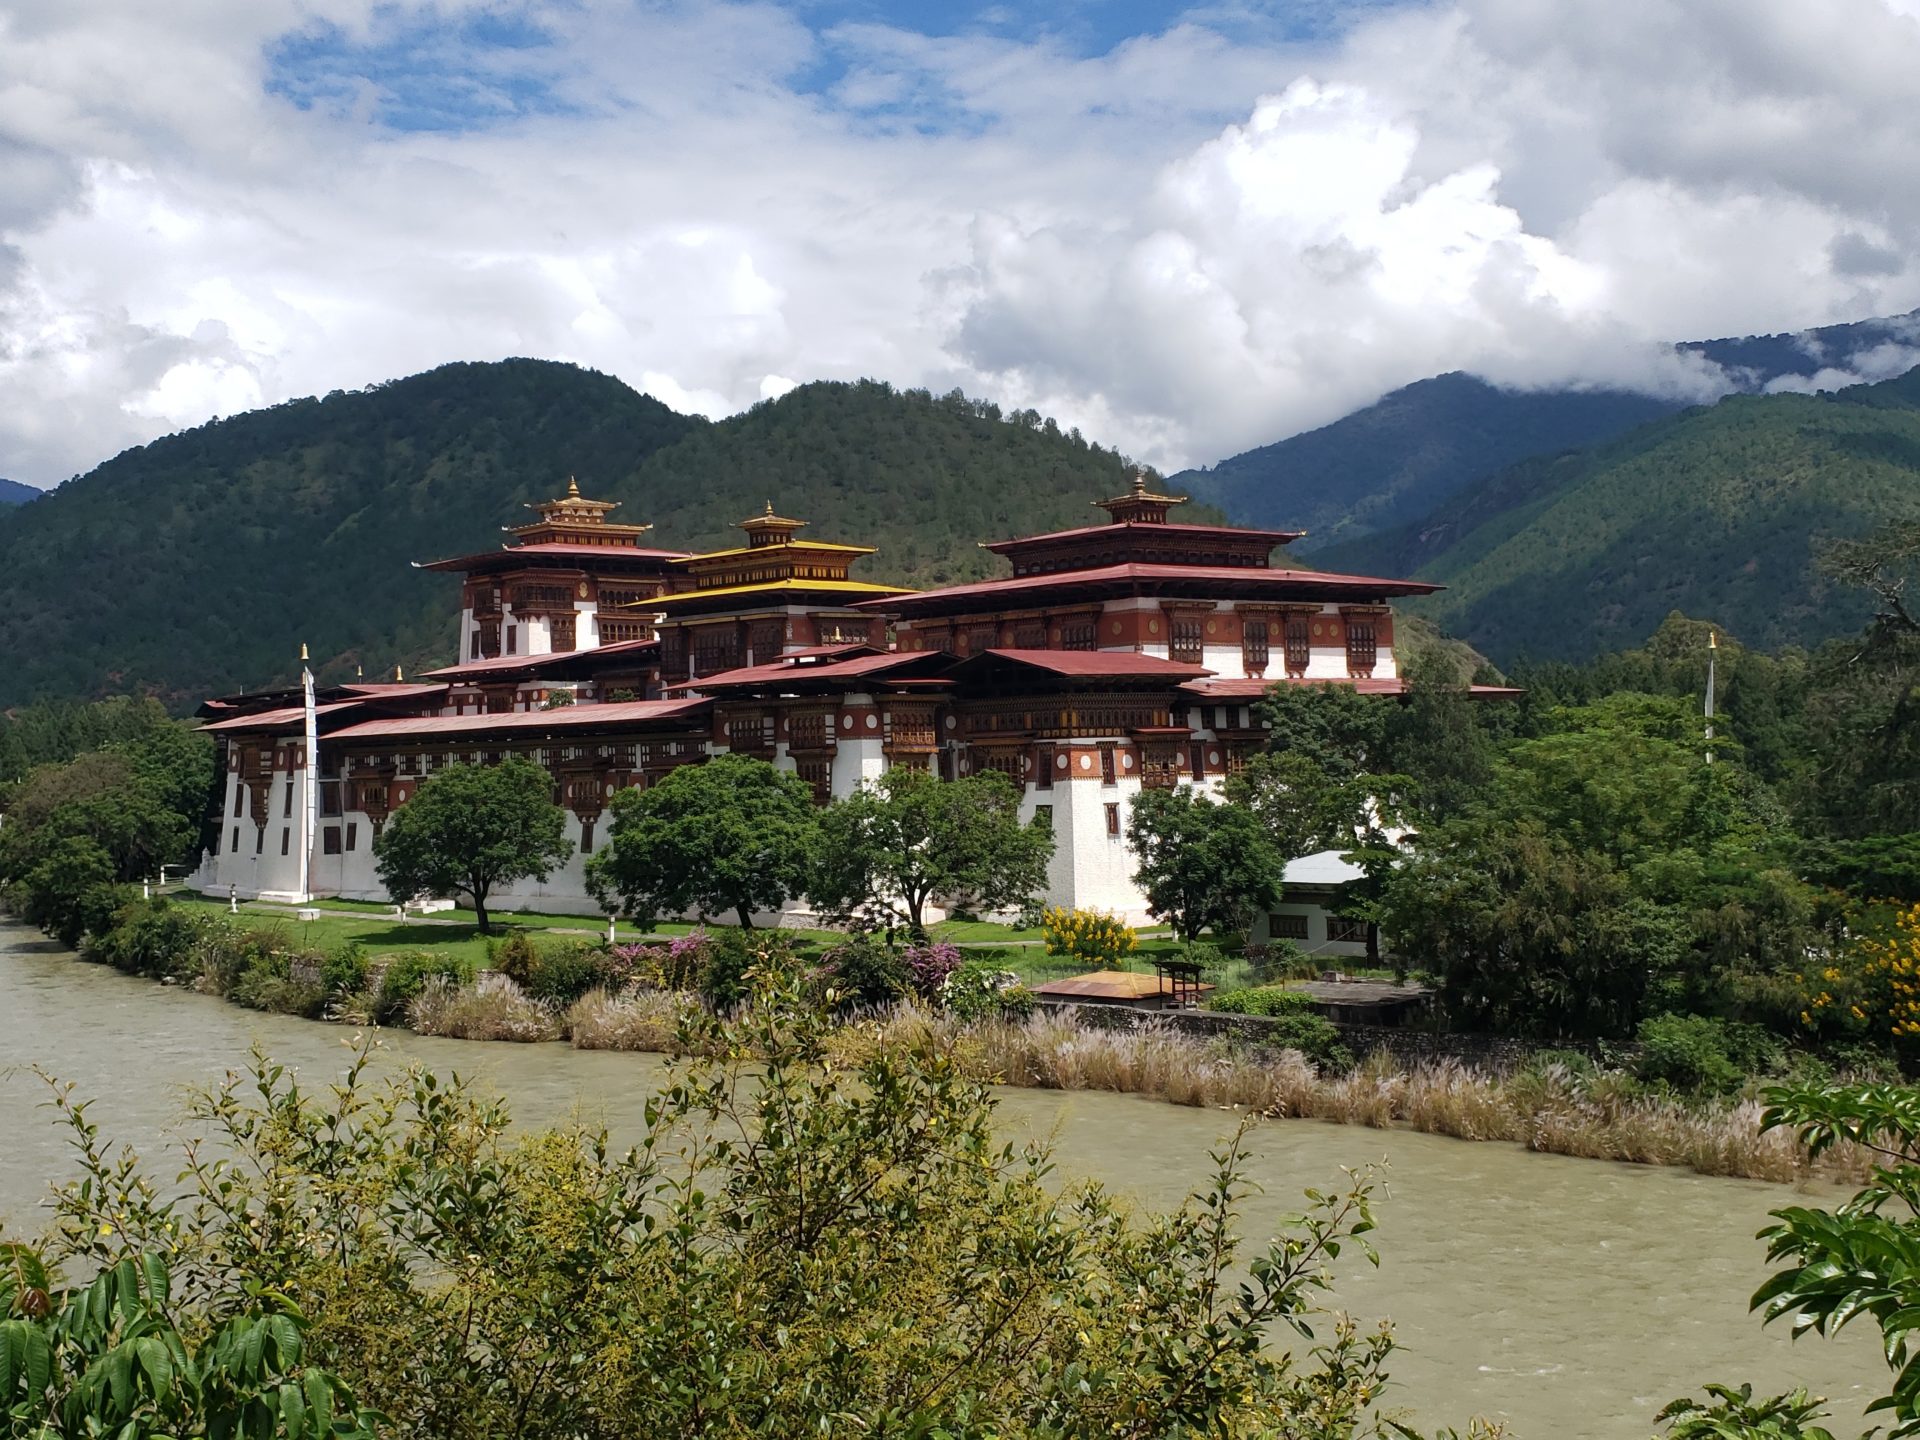 Punakha Dzong with trees and mountains in the background